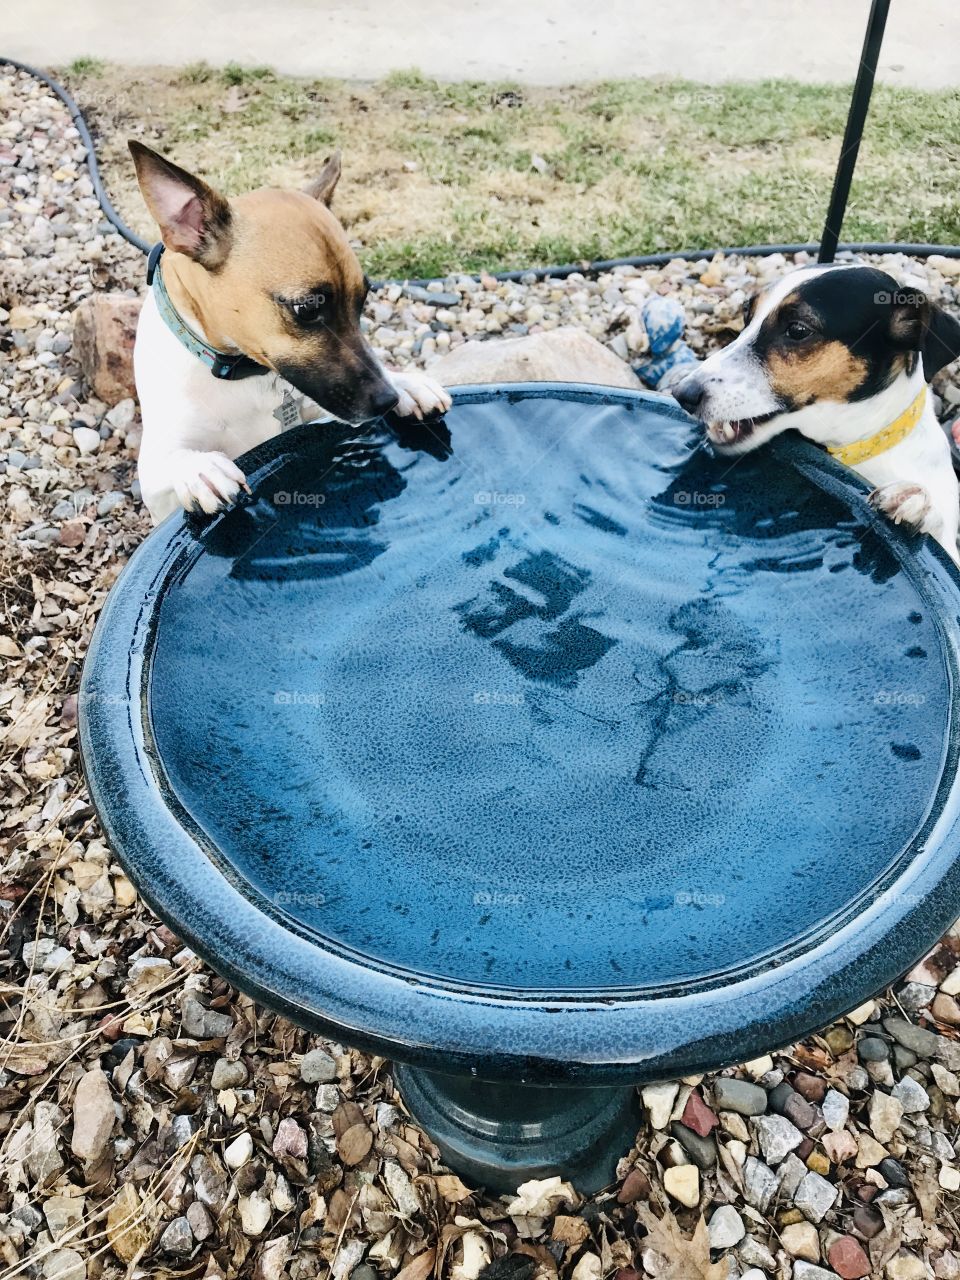 Super darling photo of terrier dogs looking as sweet as ever drinking out of birdbath!! 